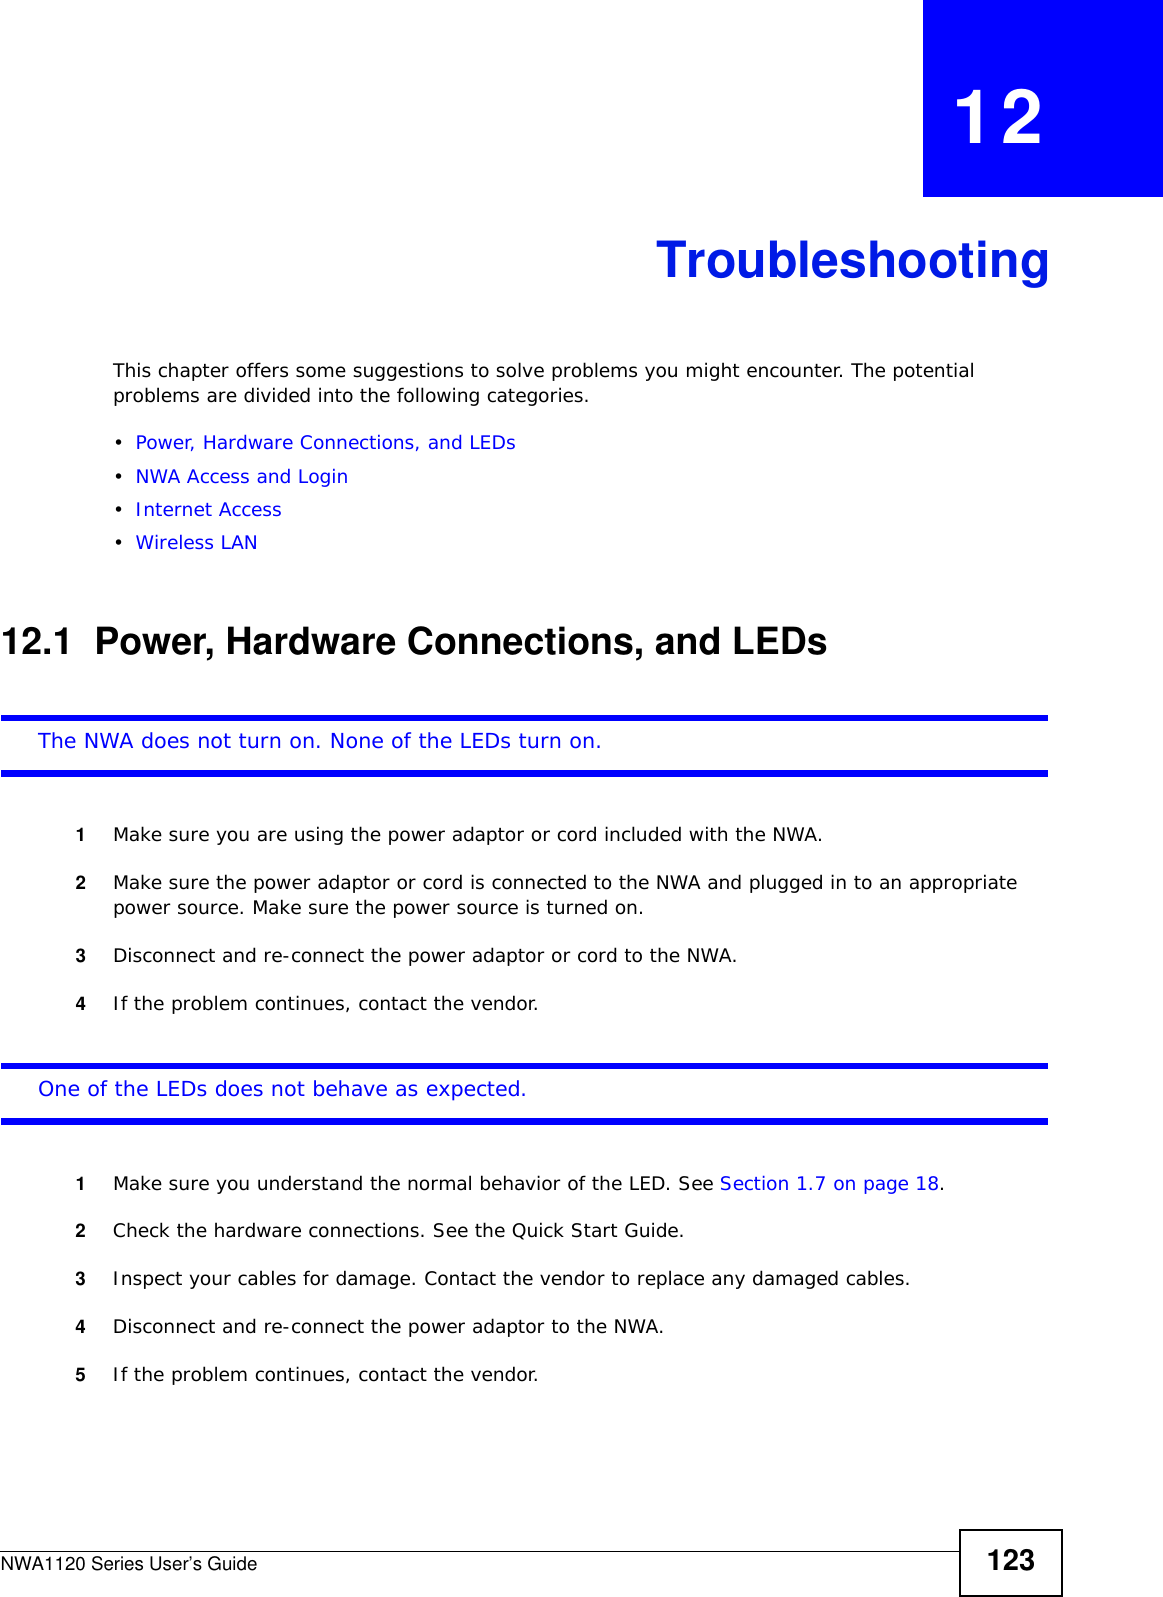 NWA1120 Series User’s Guide 123CHAPTER   12TroubleshootingThis chapter offers some suggestions to solve problems you might encounter. The potential problems are divided into the following categories.•Power, Hardware Connections, and LEDs•NWA Access and Login•Internet Access•Wireless LAN12.1  Power, Hardware Connections, and LEDsThe NWA does not turn on. None of the LEDs turn on.1Make sure you are using the power adaptor or cord included with the NWA.2Make sure the power adaptor or cord is connected to the NWA and plugged in to an appropriate power source. Make sure the power source is turned on.3Disconnect and re-connect the power adaptor or cord to the NWA. 4If the problem continues, contact the vendor.One of the LEDs does not behave as expected.1Make sure you understand the normal behavior of the LED. See Section 1.7 on page 18.2Check the hardware connections. See the Quick Start Guide.3Inspect your cables for damage. Contact the vendor to replace any damaged cables.4Disconnect and re-connect the power adaptor to the NWA. 5If the problem continues, contact the vendor.